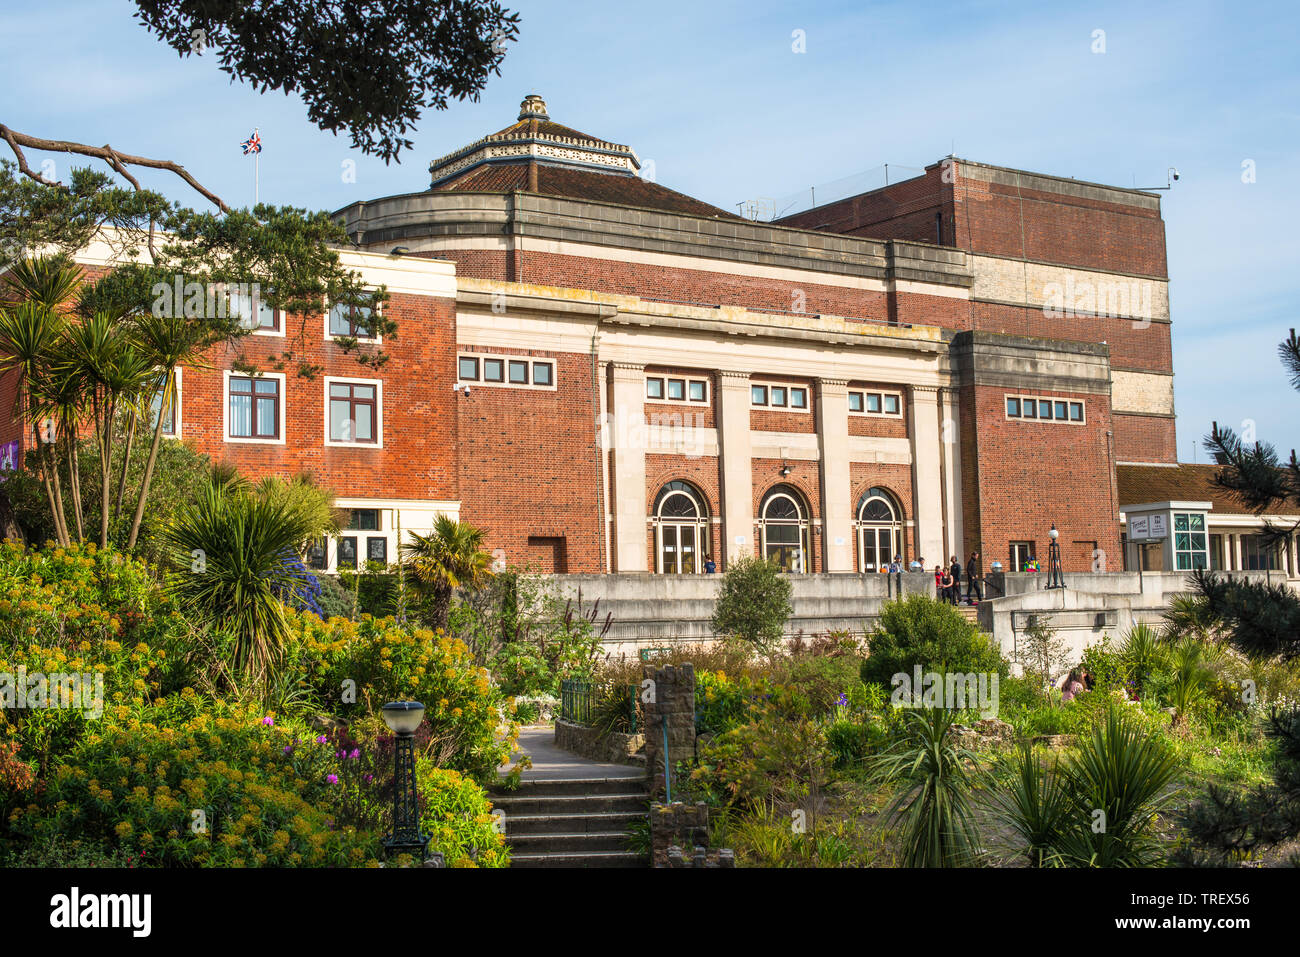 The Pavilion Theatre and Ballroom building circa 1920s seen from the Lower gardens in Bournemouth, Dorset, England, UK Stock Photo